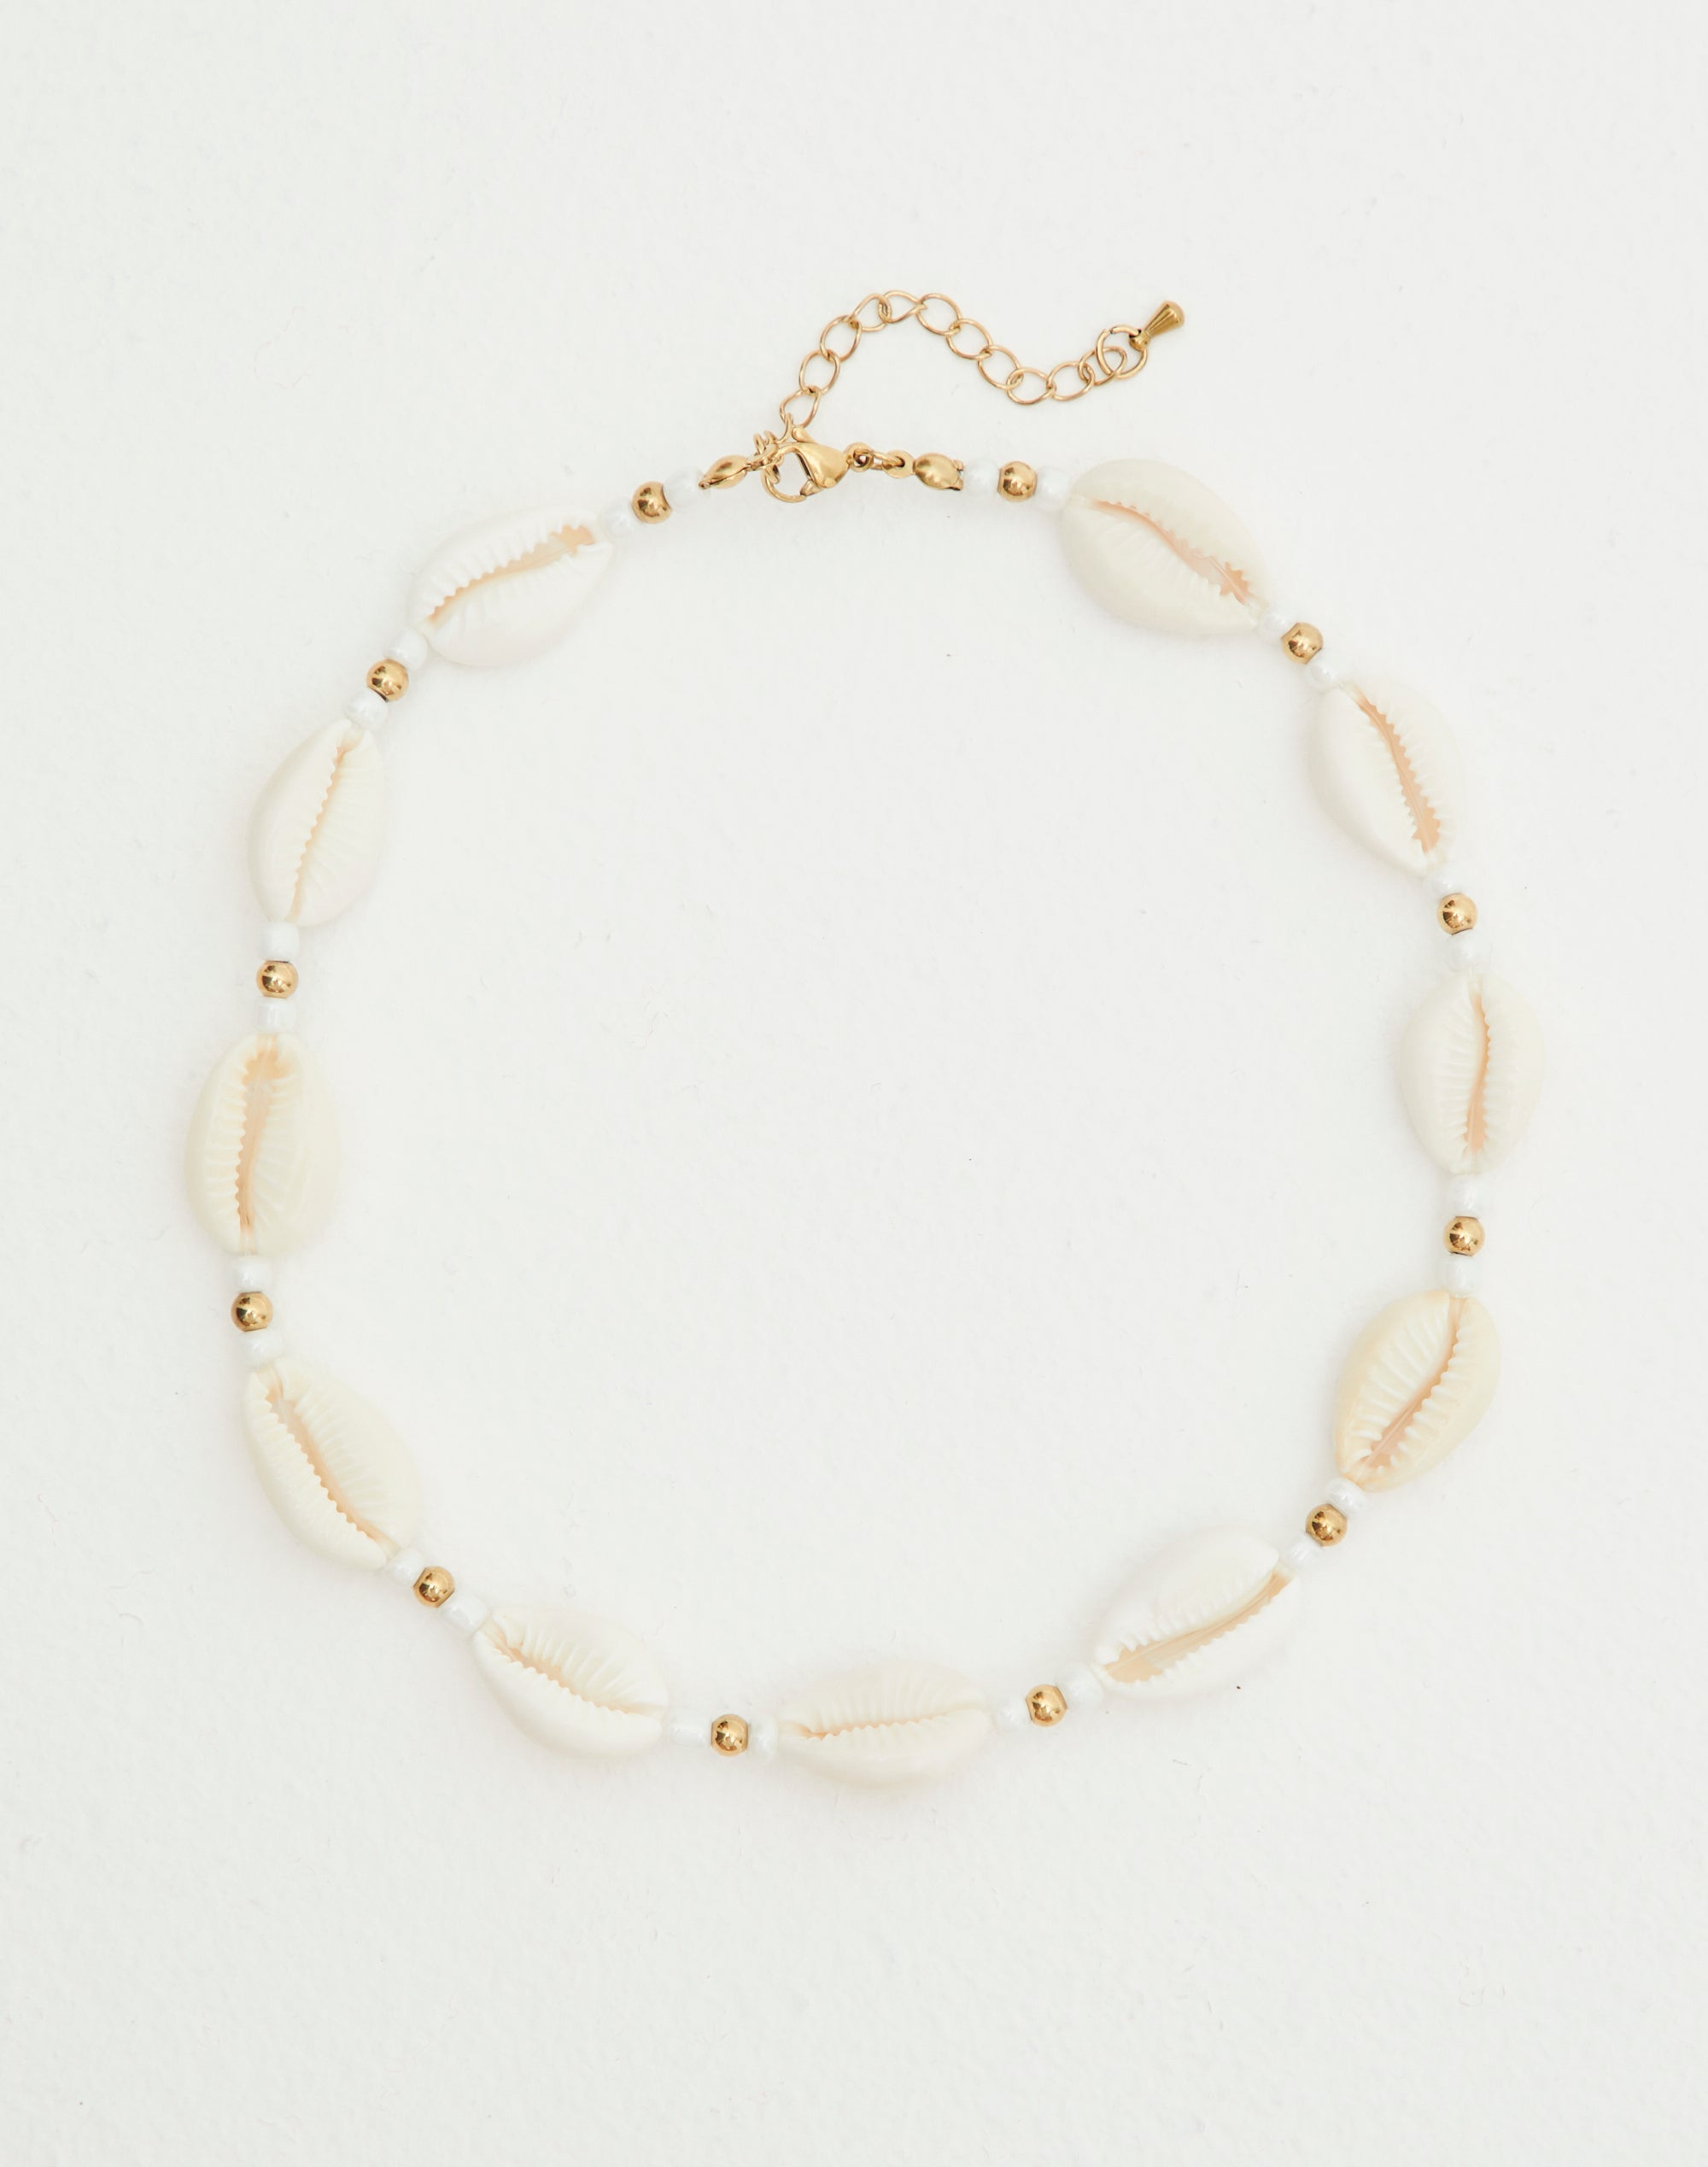 Exquisite Seashell Shell Pendant Necklace Choker Necklace Perfect Summer  Accessory For Women And Girls, Ideal Birthday Gift From Derrickwhite, $6.24  | DHgate.Com